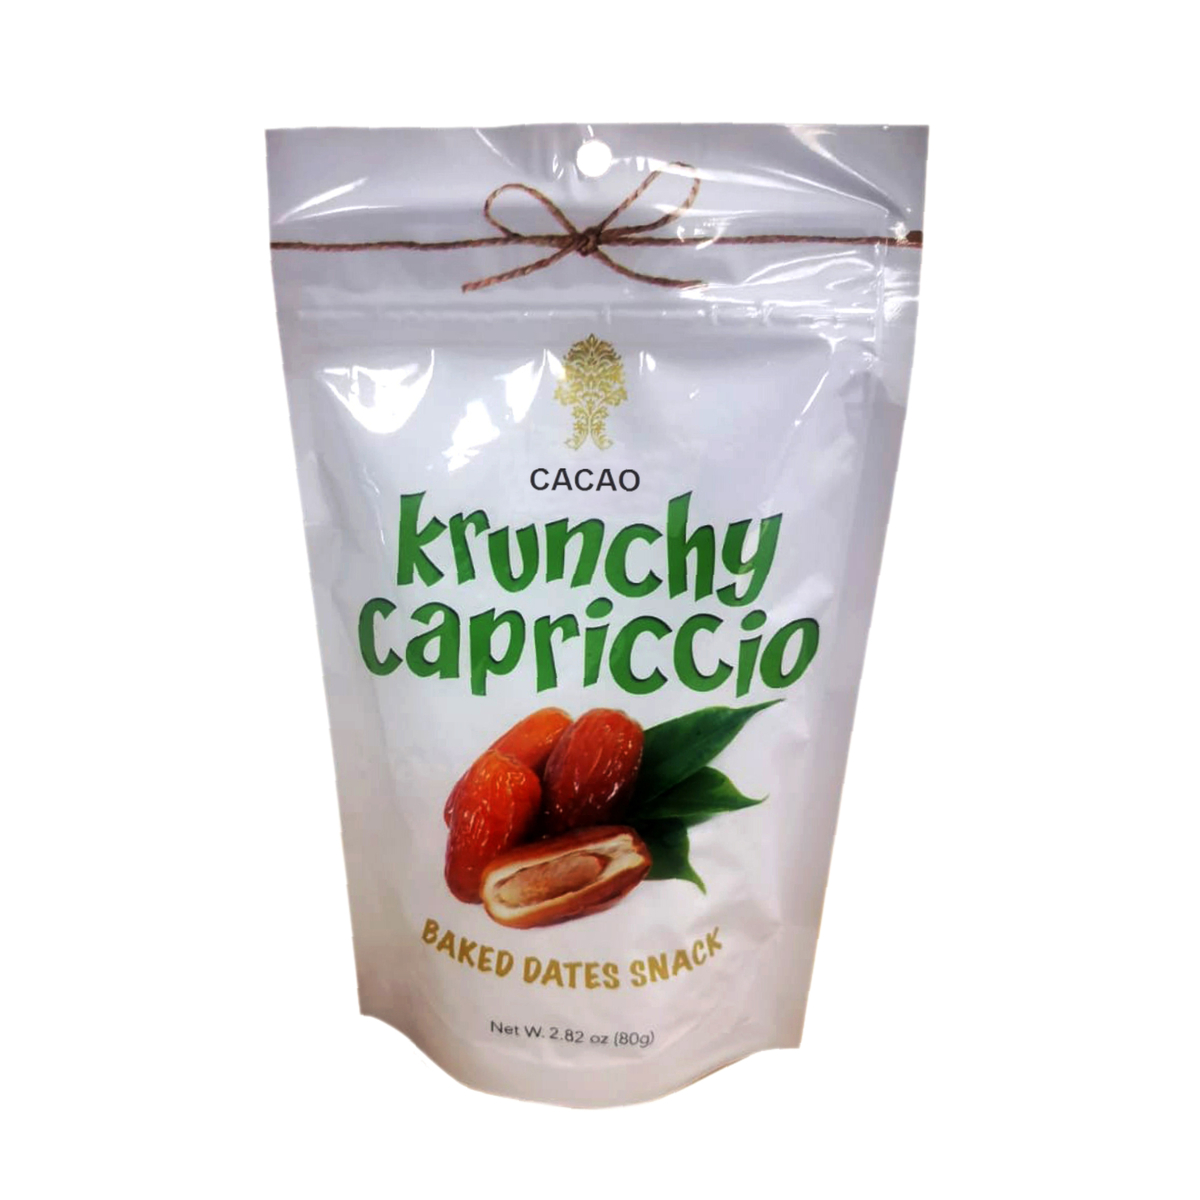 Krunchy Capriccio Baked Dates Snack With Cacao Flavour 80g